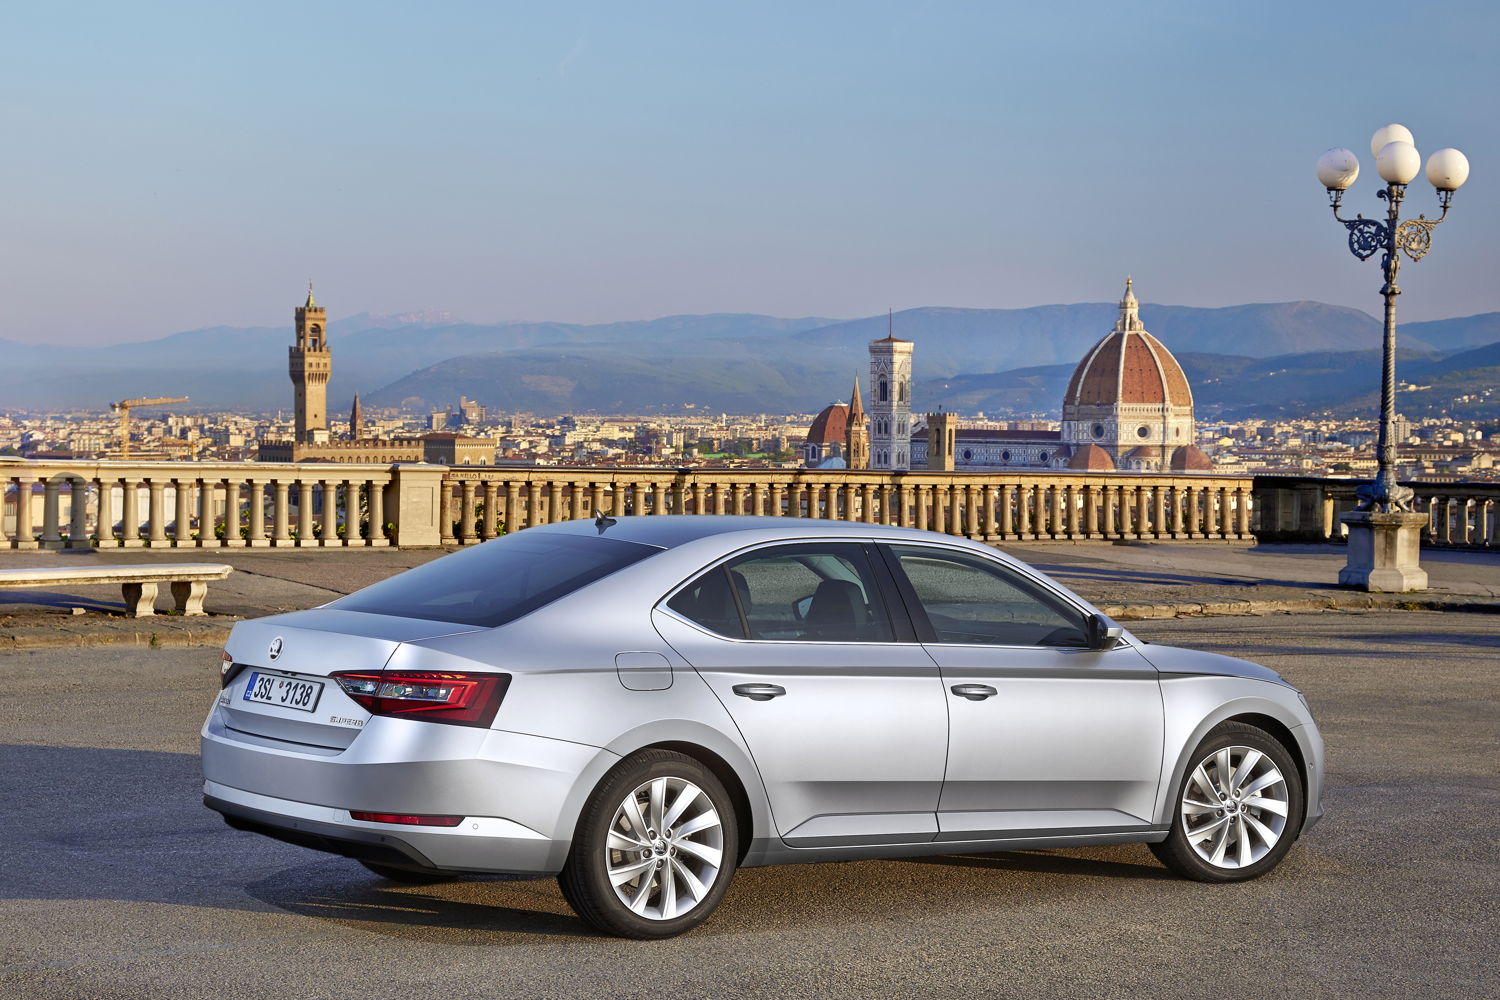 The brand’s flagship achieved the biggest increase: The ŠKODA SUPERB exceeded the previous year's result by 18.2% with 11,200 deliveries.